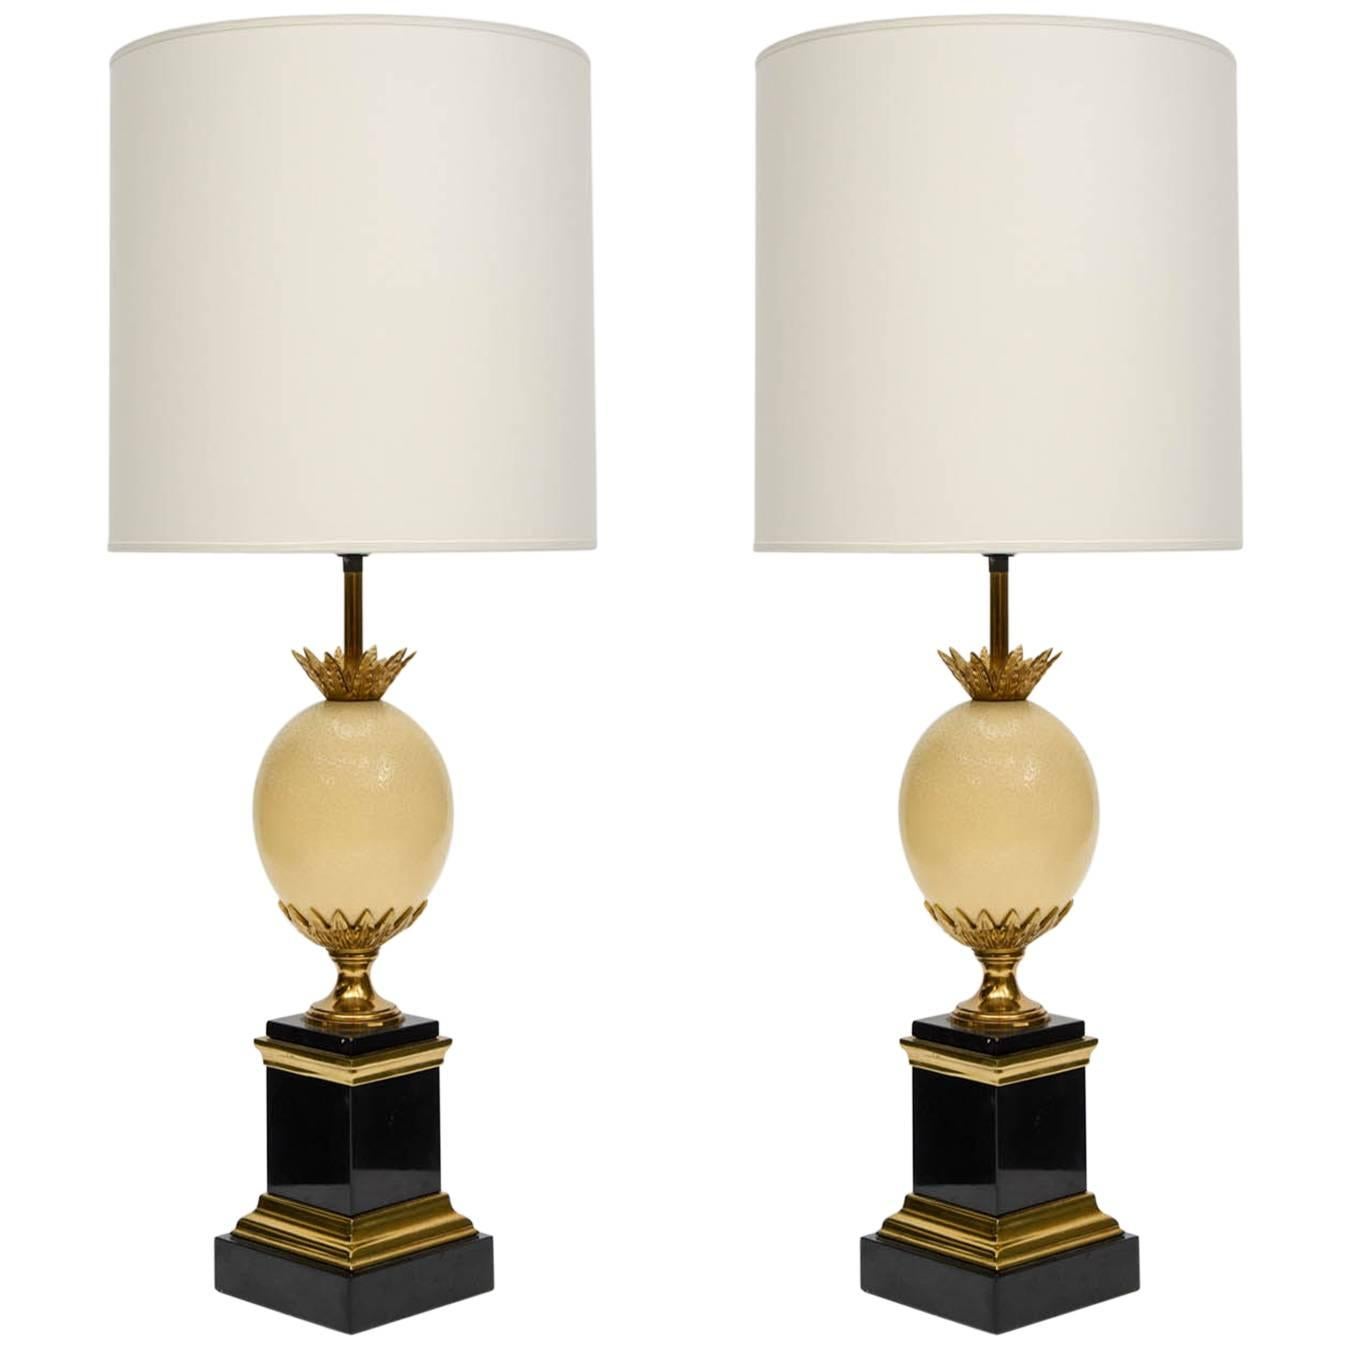 Pair of Ostrich Egg Lamps by Maison Charles